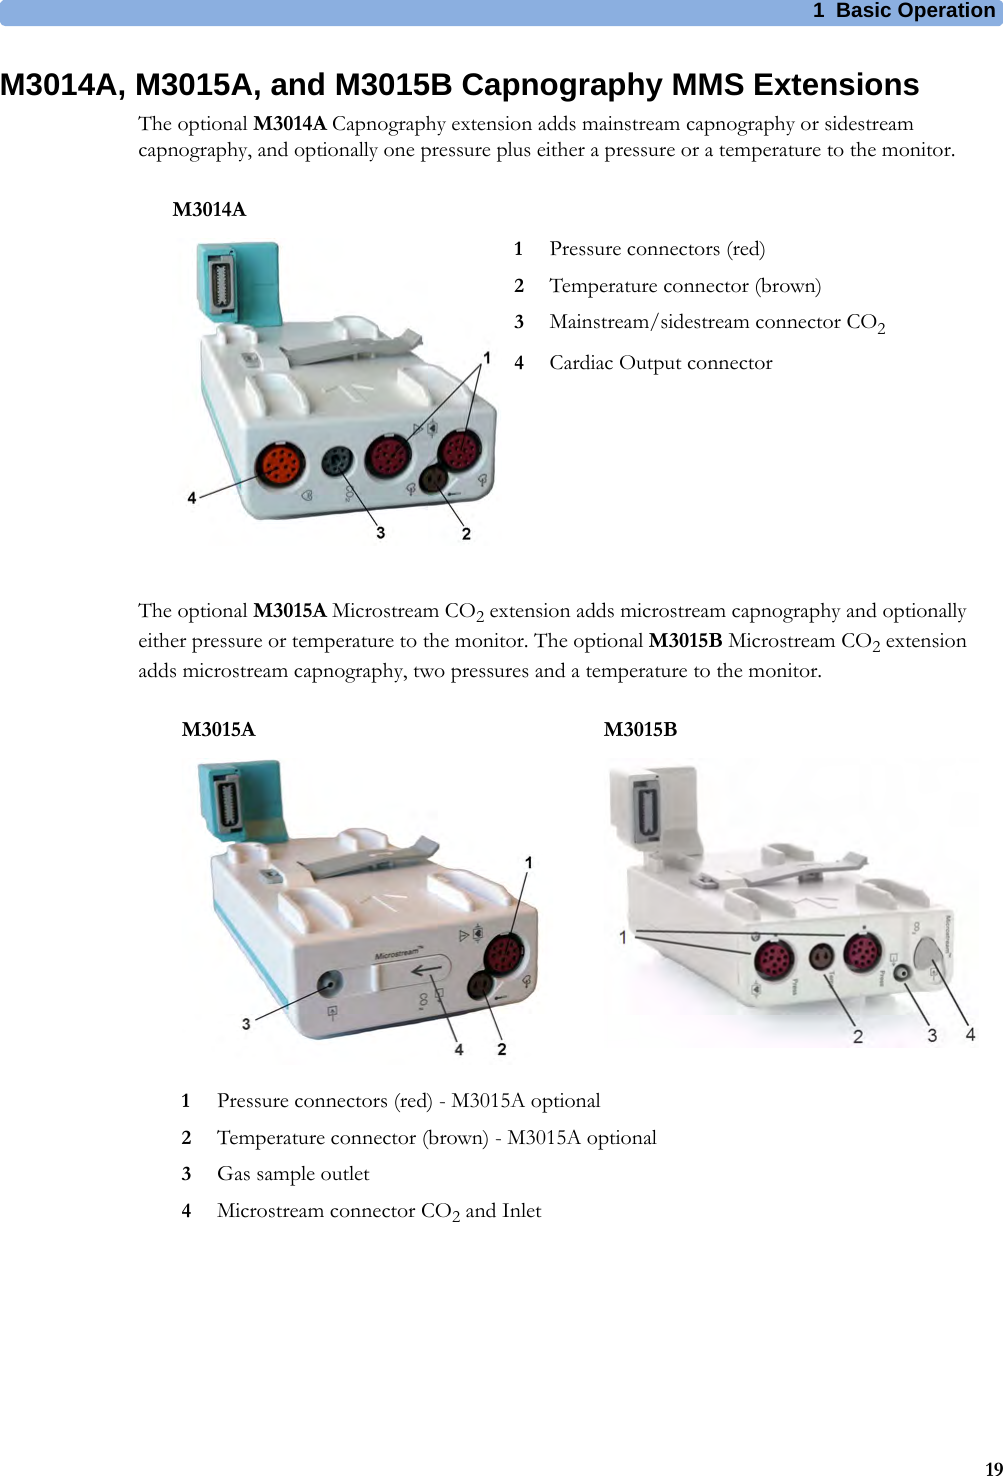 1 Basic Operation19M3014A, M3015A, and M3015B Capnography MMS ExtensionsThe optional M3014A Capnography extension adds mainstream capnography or sidestream capnography, and optionally one pressure plus either a pressure or a temperature to the monitor.The optional M3015A Microstream CO2 extension adds microstream capnography and optionally either pressure or temperature to the monitor. The optional M3015B Microstream CO2 extension adds microstream capnography, two pressures and a temperature to the monitor.M3014A1Pressure connectors (red)2Temperature connector (brown)3Mainstream/sidestream connector CO24Cardiac Output connectorM3015A M3015B1Pressure connectors (red) - M3015A optional2Temperature connector (brown) - M3015A optional3Gas sample outlet4Microstream connector CO2 and Inlet